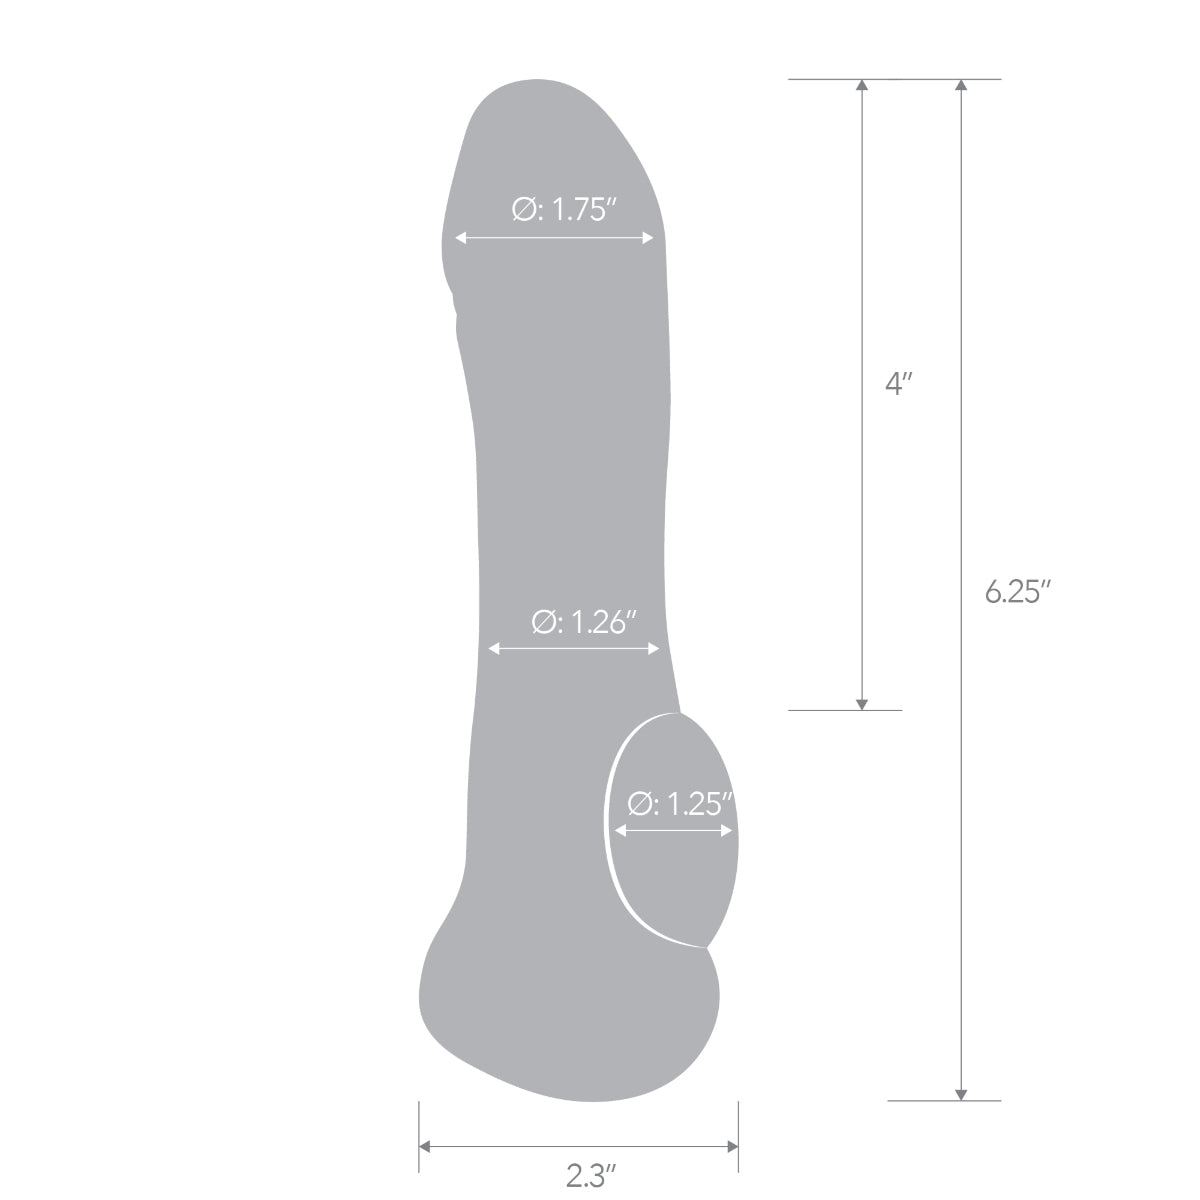 Silicone 6.25" Enhancing Penis Sleeve Extension - Transparent & Reusable